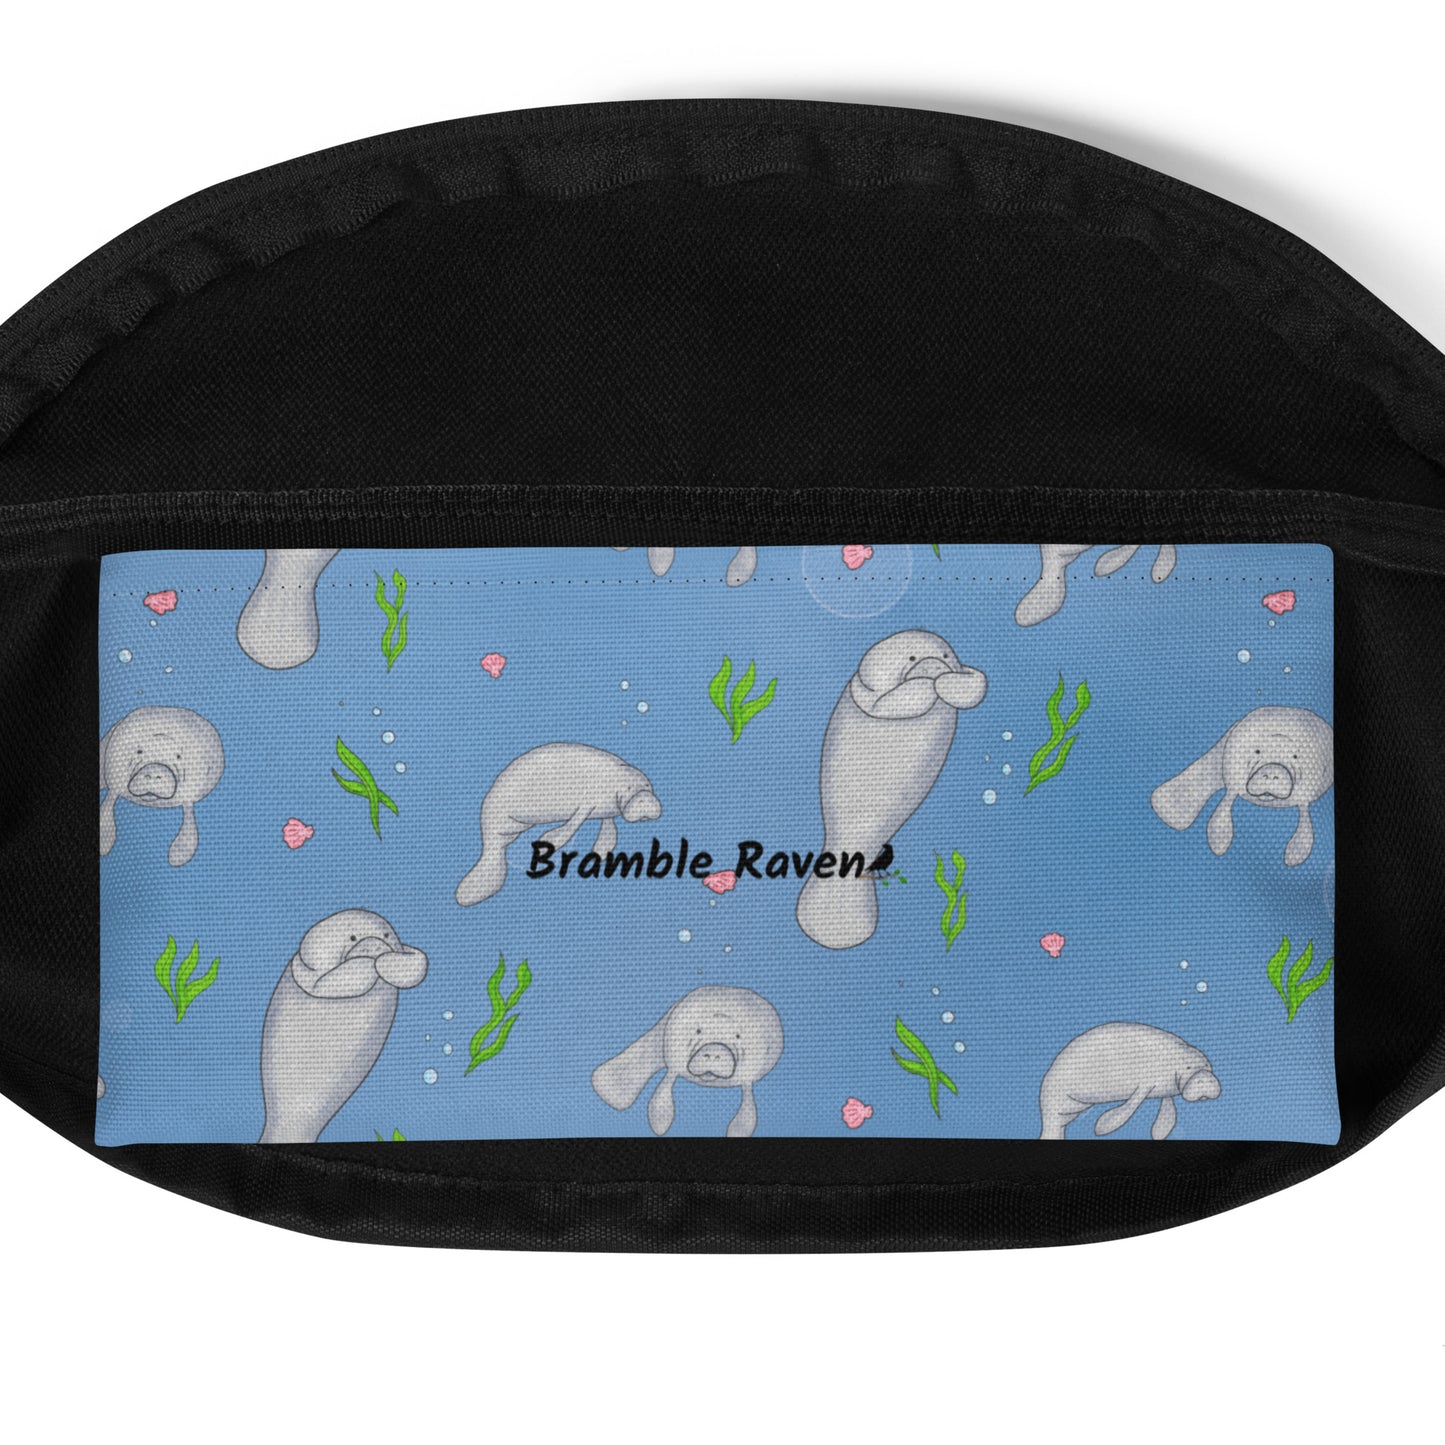 Cute manatee patterned belt bag with adjustable straps, zippered pouch, and small inner pocket. Inside pocket detail view.